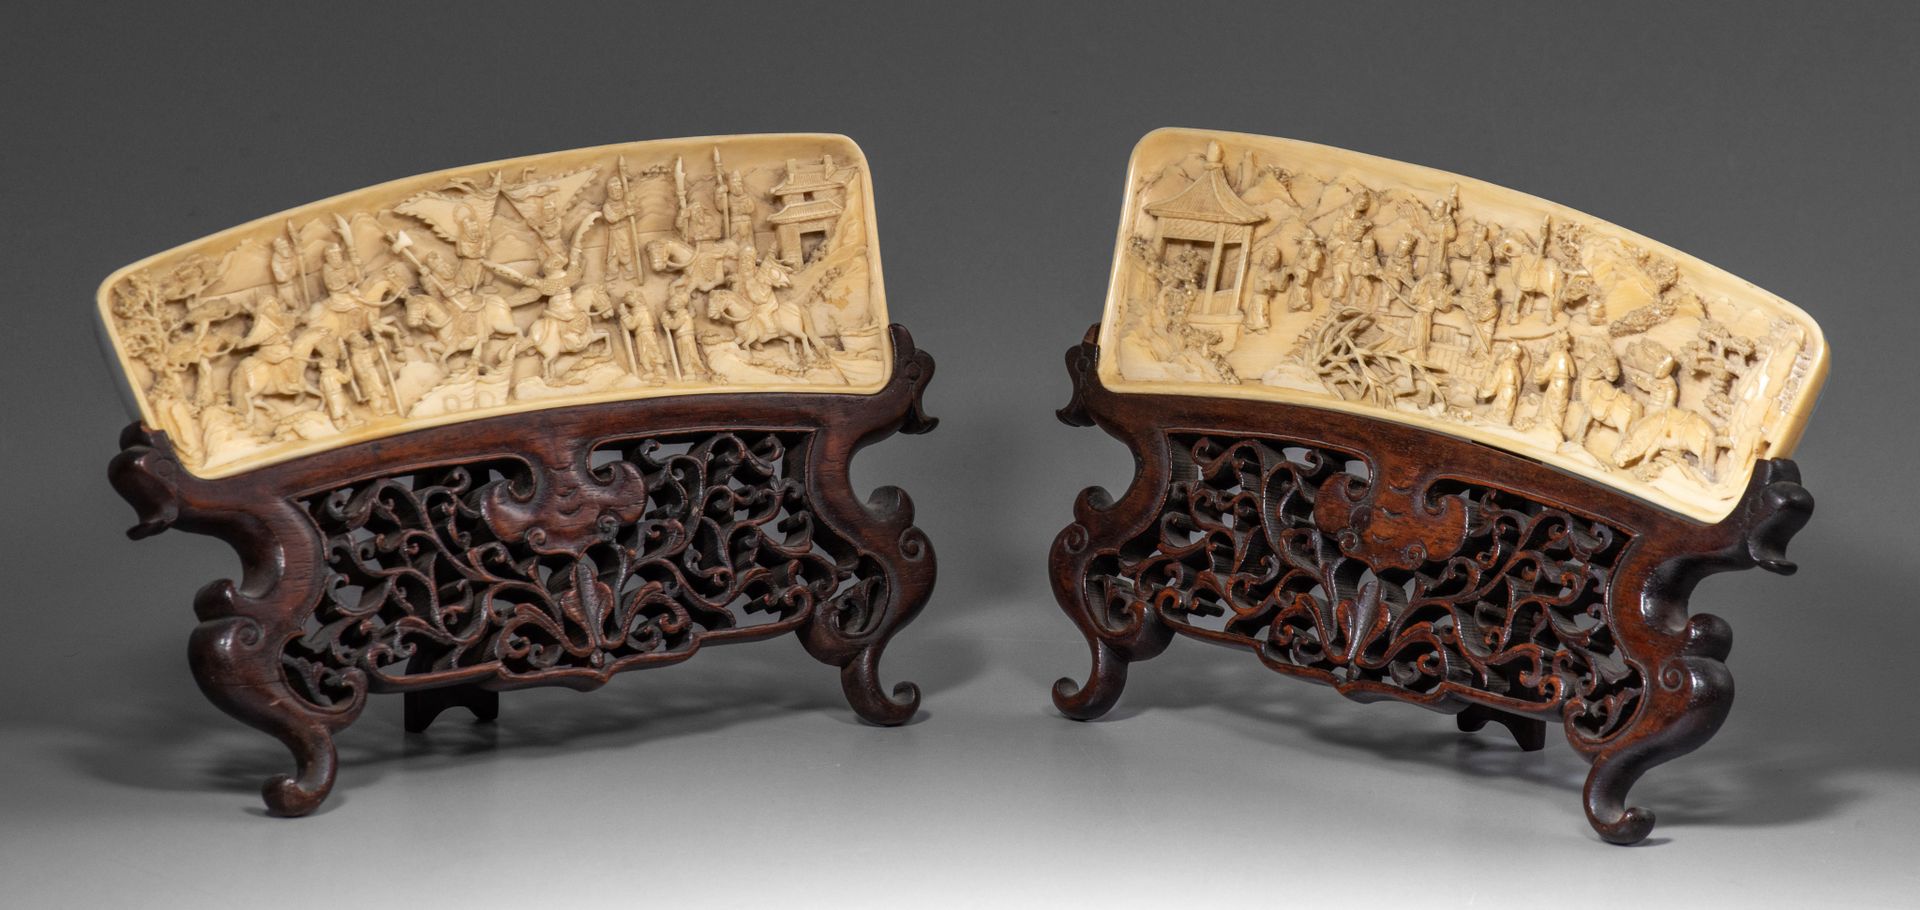 Two Chinese ivory carved plaques with matching scenes, one high-relief carved wi&hellip;